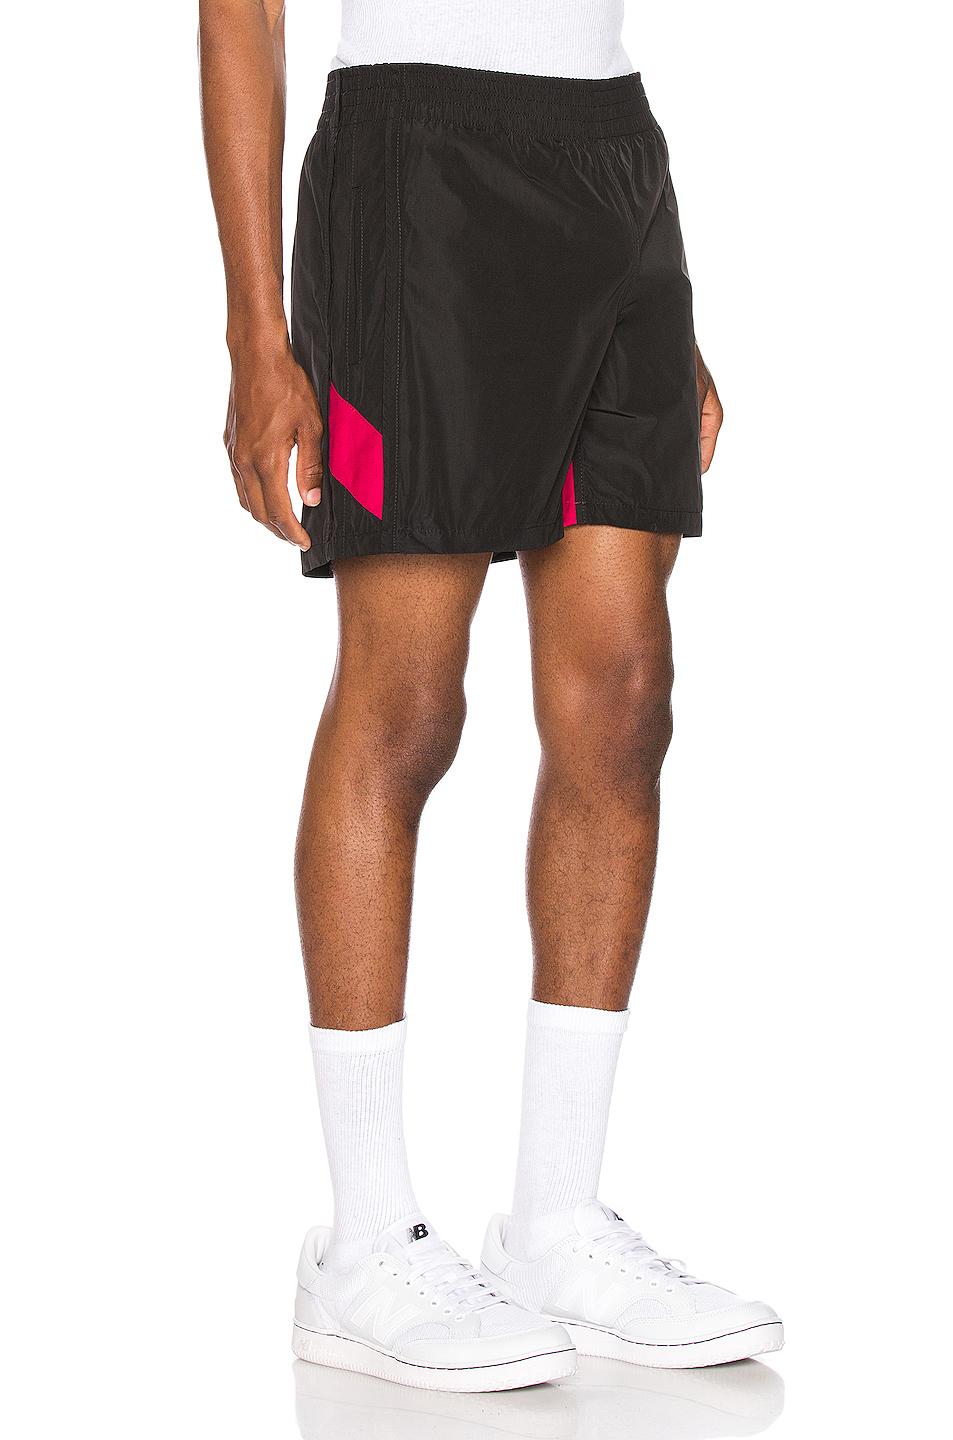 Wales Bonner Synthetic Football Shorts in Black & Fuchsia (Black) for ...